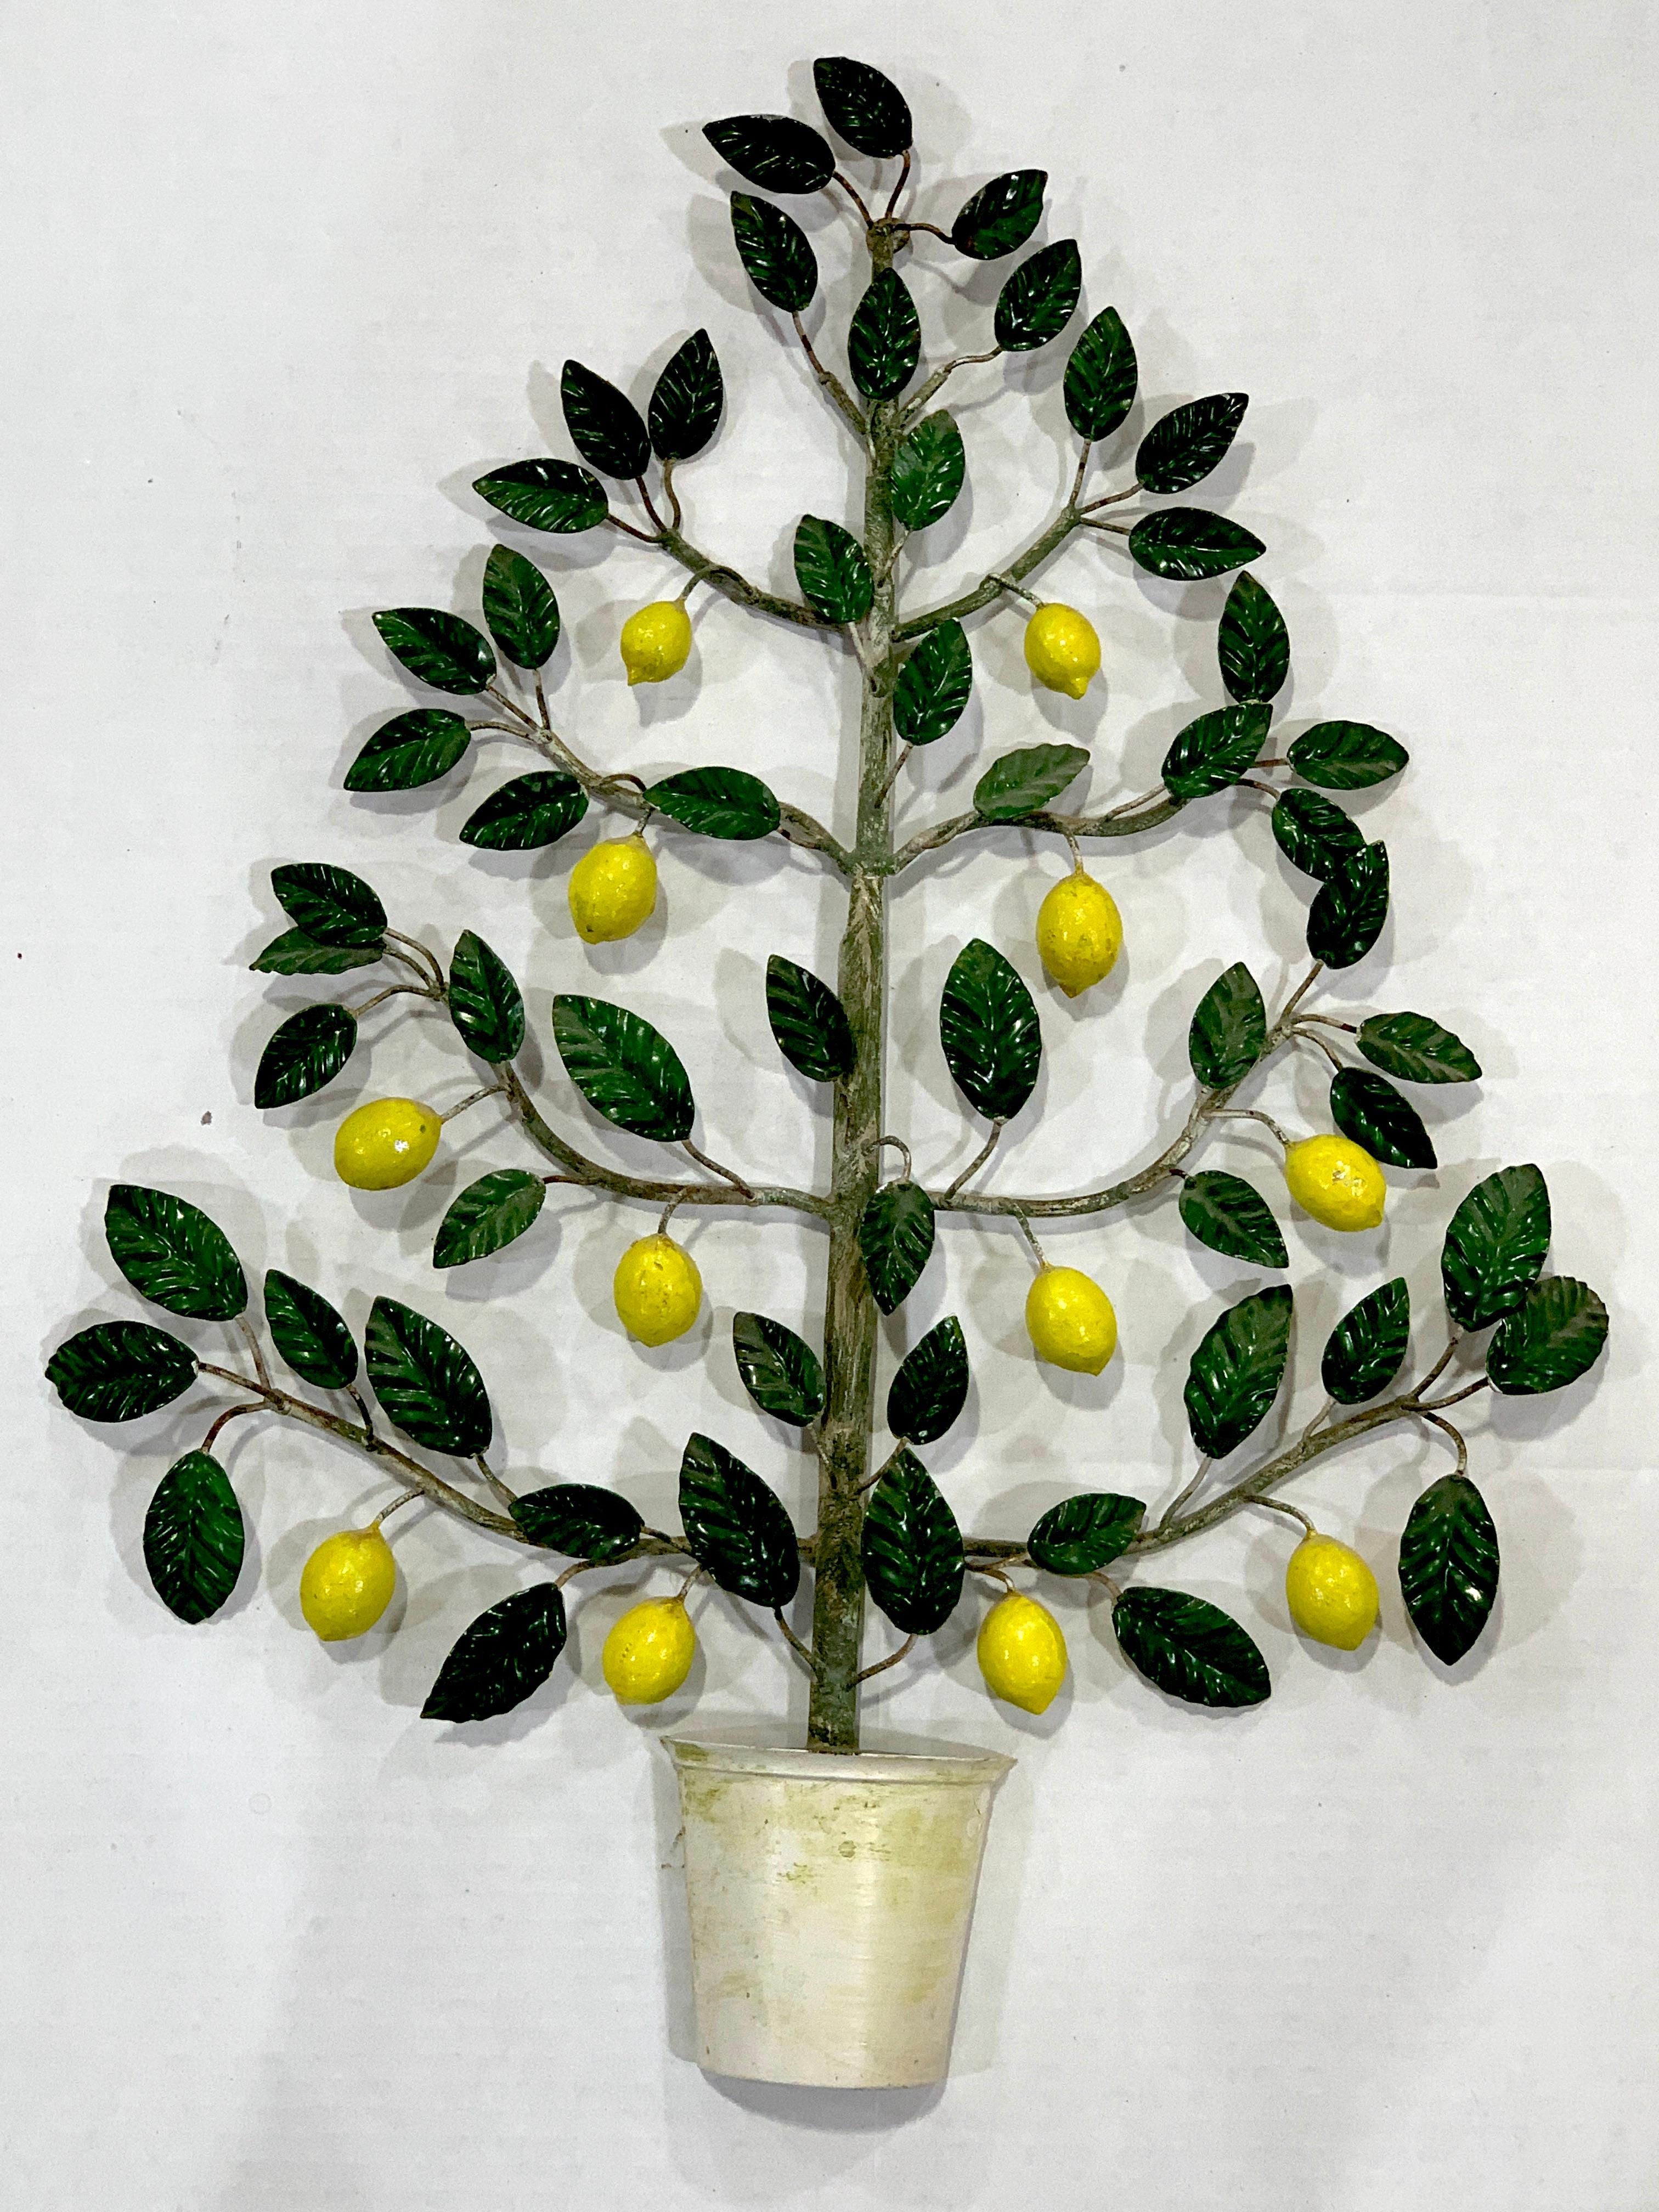 Italian midcentury tole wall sculpture of a lemon tree, beautifully painted, a three dimensional sculpture of a potted lemon topiary
Lemon tree measures: 25.5 x 18 x 2.